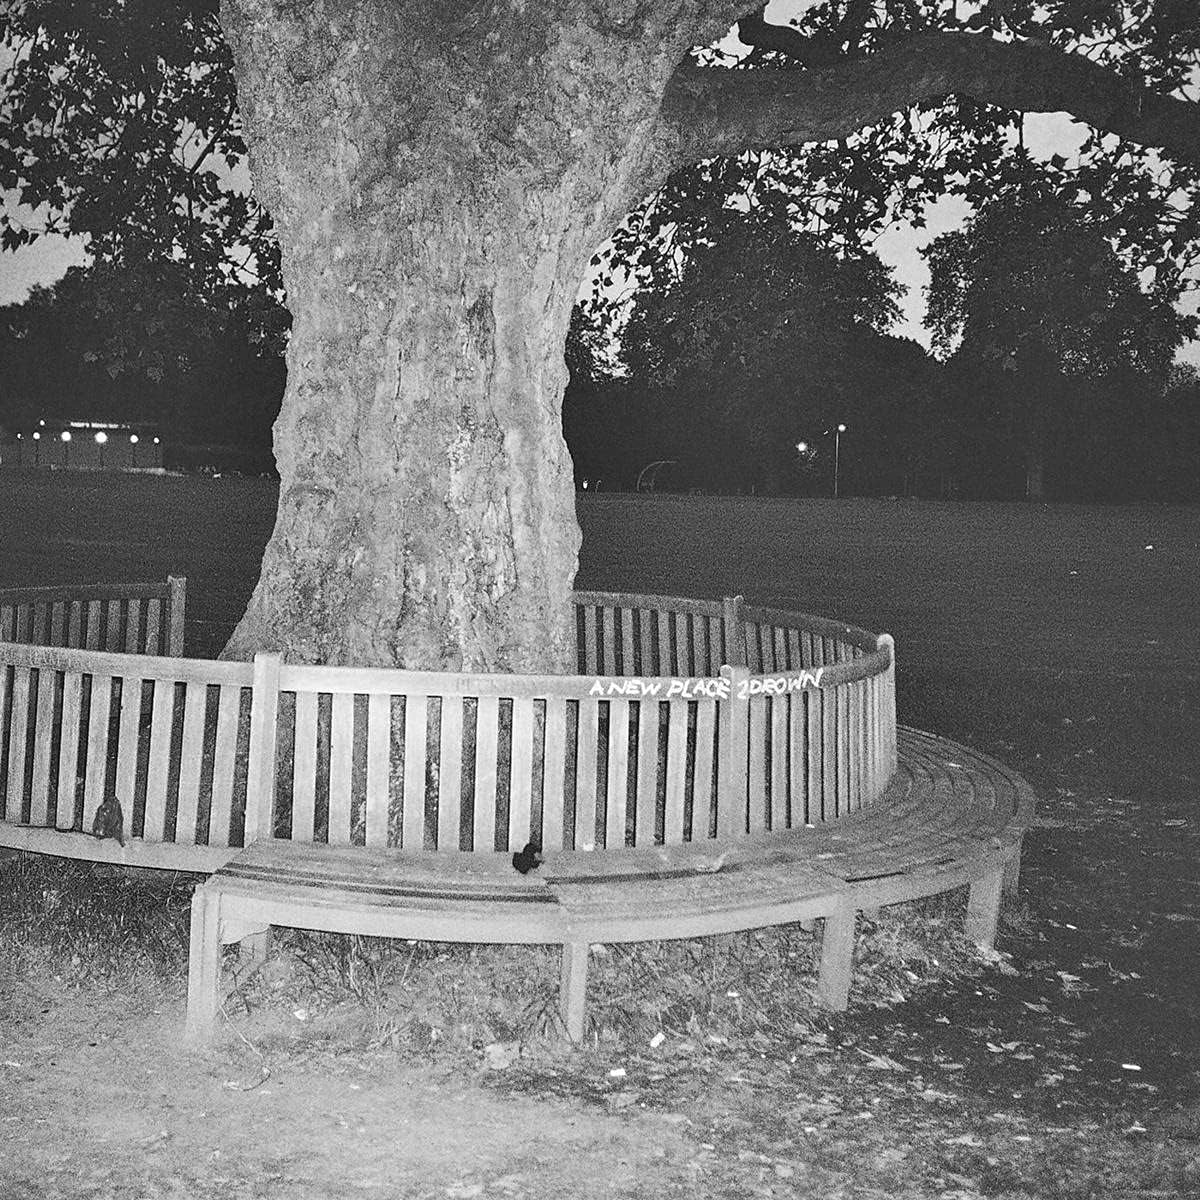 ARCHY MARSHALL 'A NEW PLACE 2 DROWN'